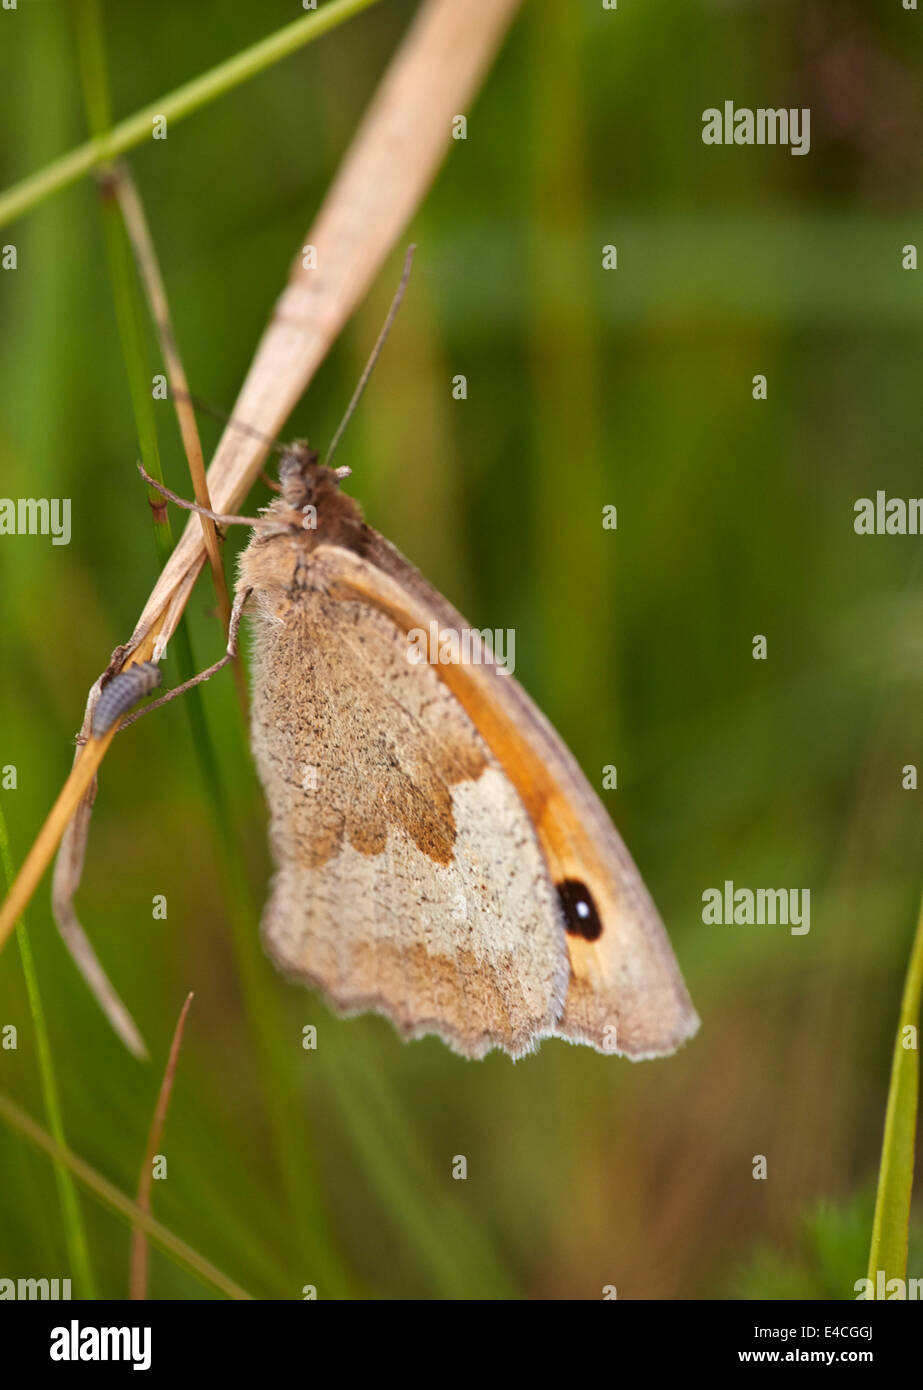 Meadow Brown butterfly. Hurst Meadows, West Molesey, Surrey, England. Stock Photo